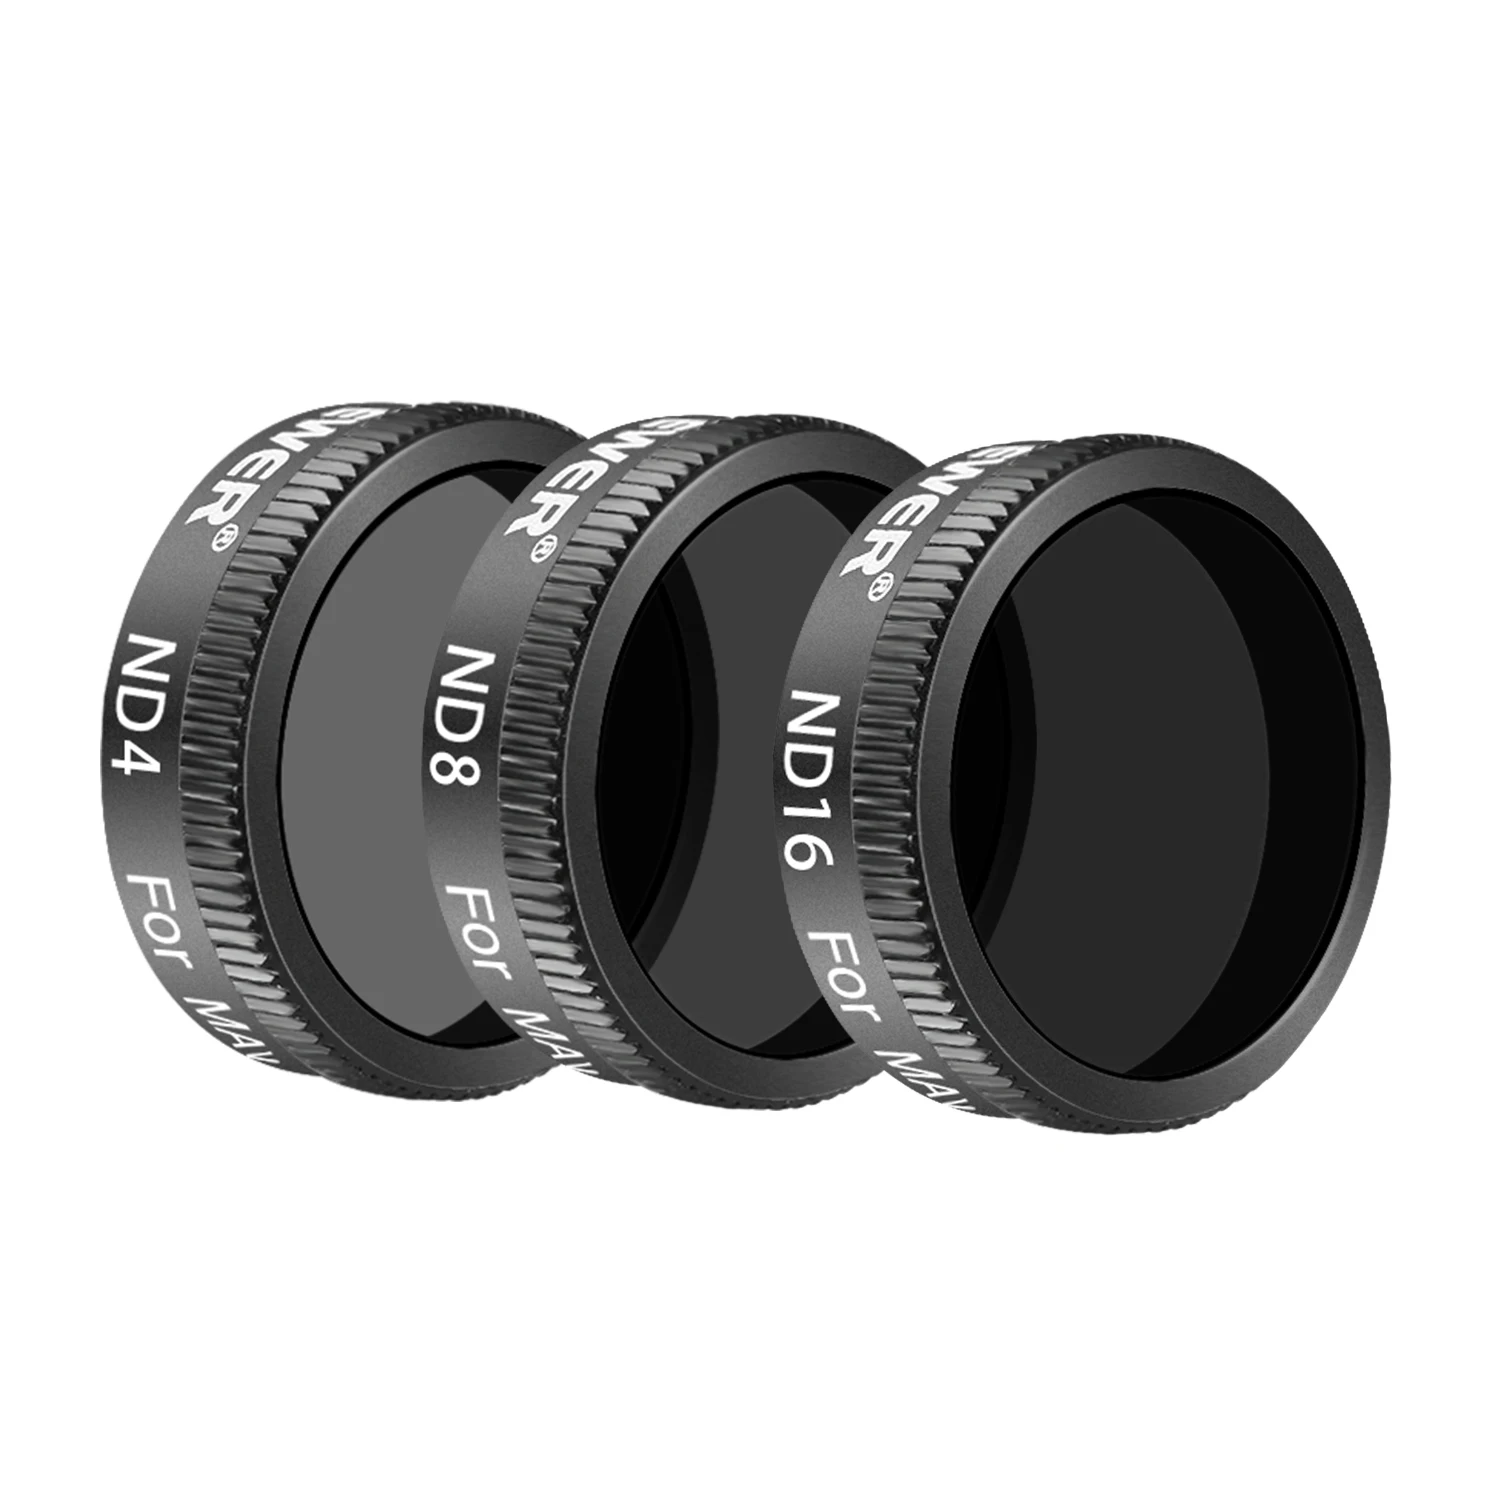 ND8 ND4/PL Black ND16 ND8/PL Made of Multi Coated Waterproof Aluminum Alloy Frame Optical Glass ND16/PL Neewer 6 Pieces Pro Lens Filter Kit for DJI Mavic Air Drone Quadcopter Includes: ND4 